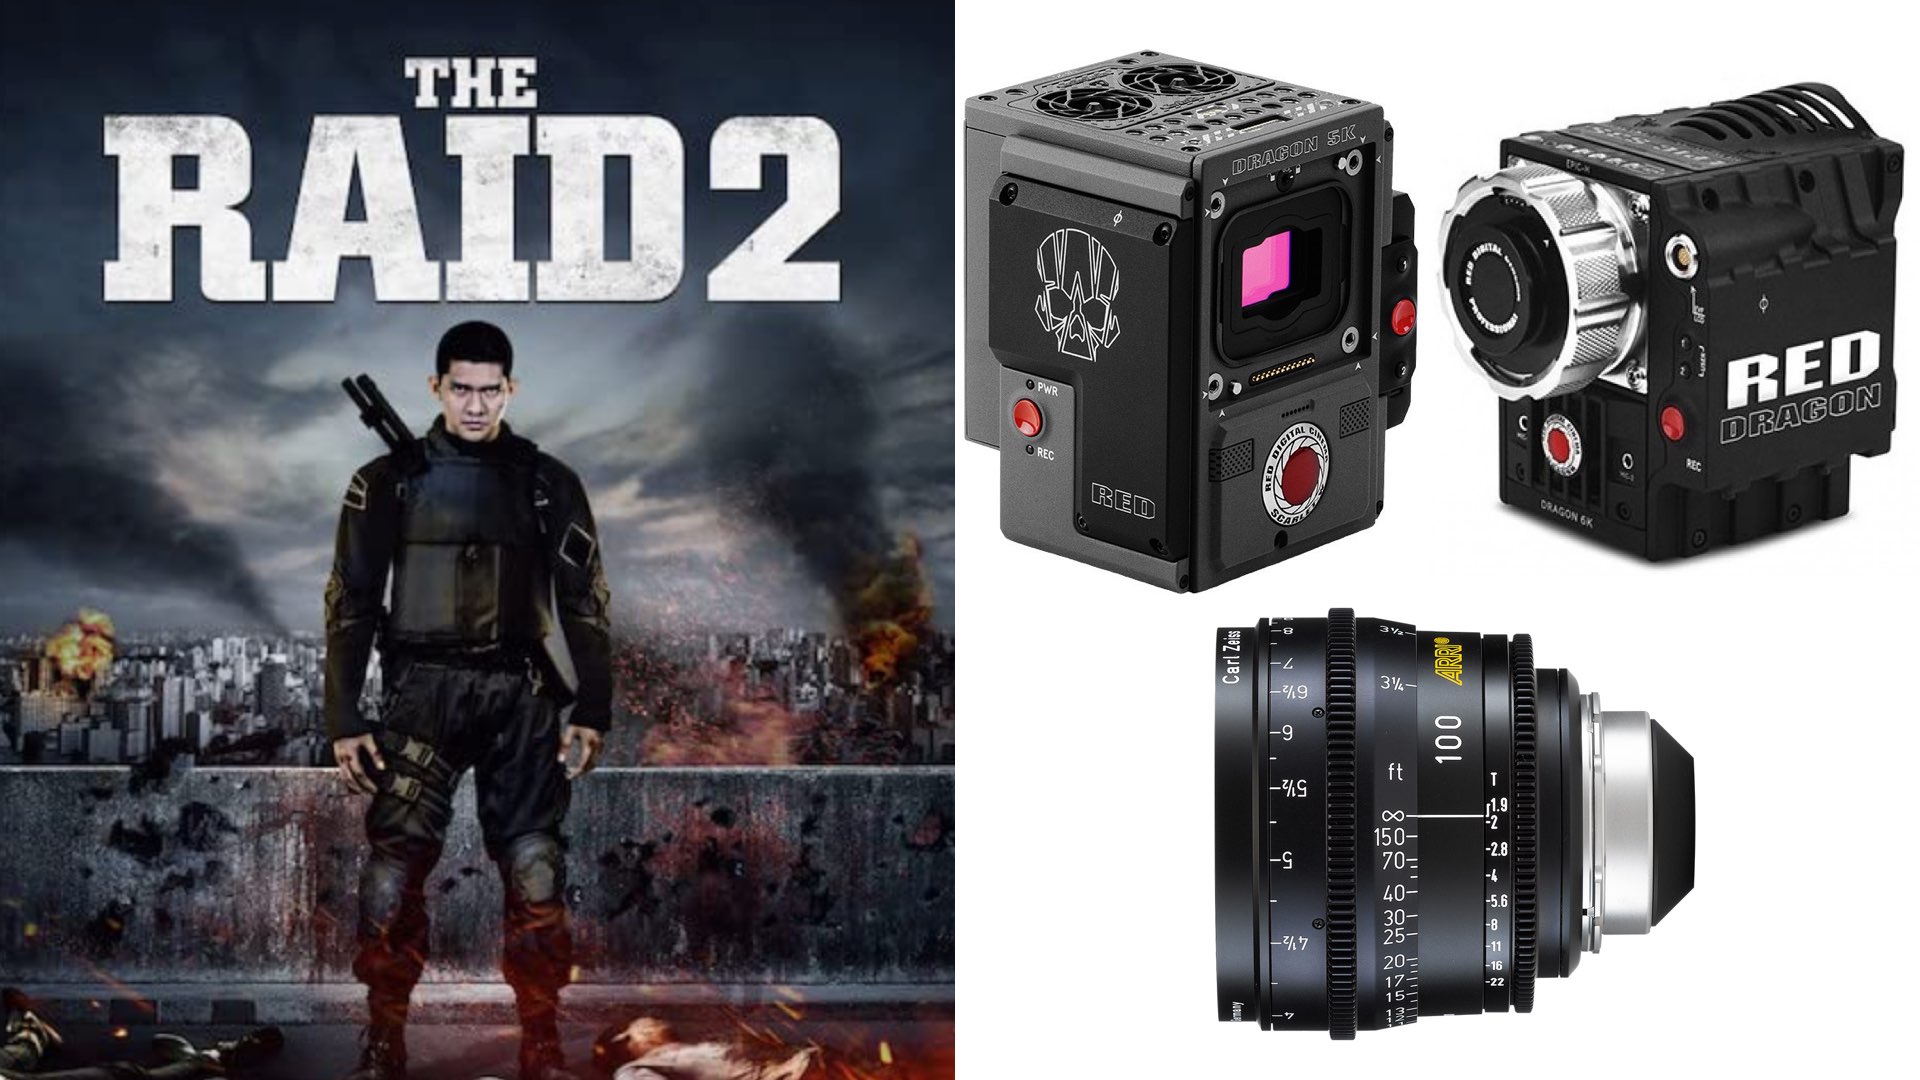 The Raid 2: An Important Landmark of Action Cinematography. Shot on RED Scarlet and Dragon, with ARRI Ultra Primes lenses.